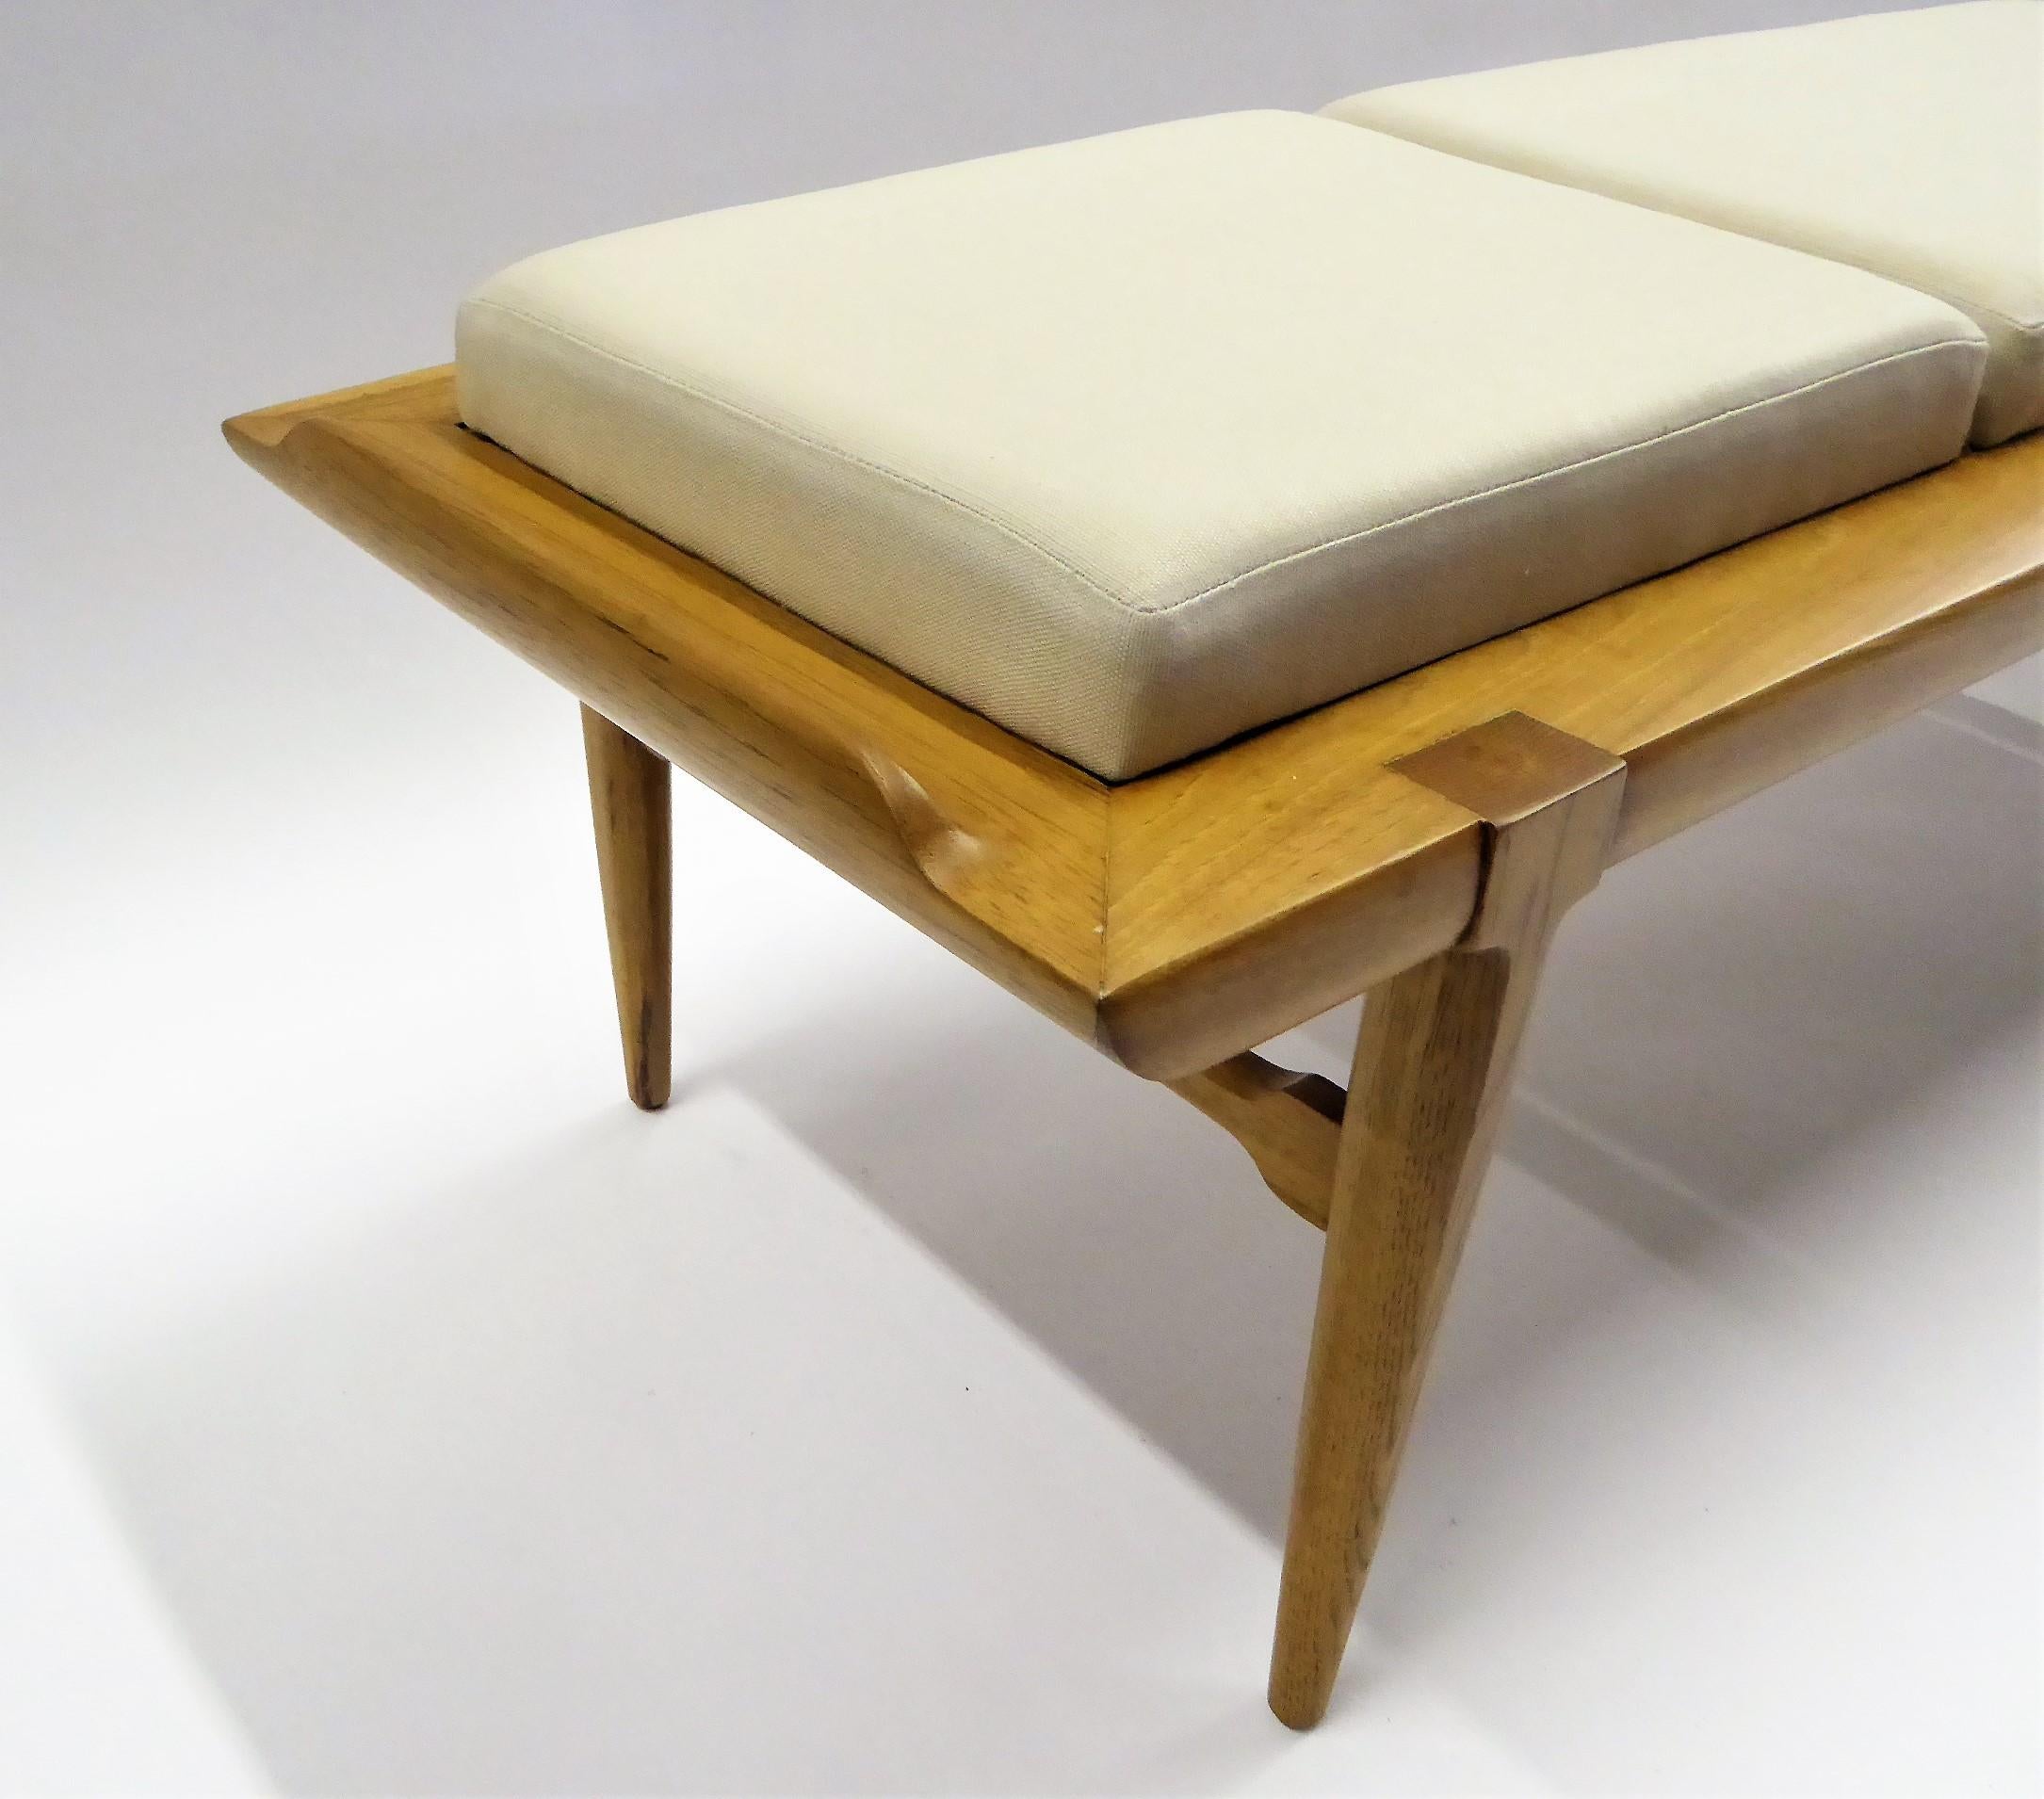 Mid-20th Century Mid-Century Modern Sophisticates Bench in Walnut and Linen by Tomlinson, 1950s